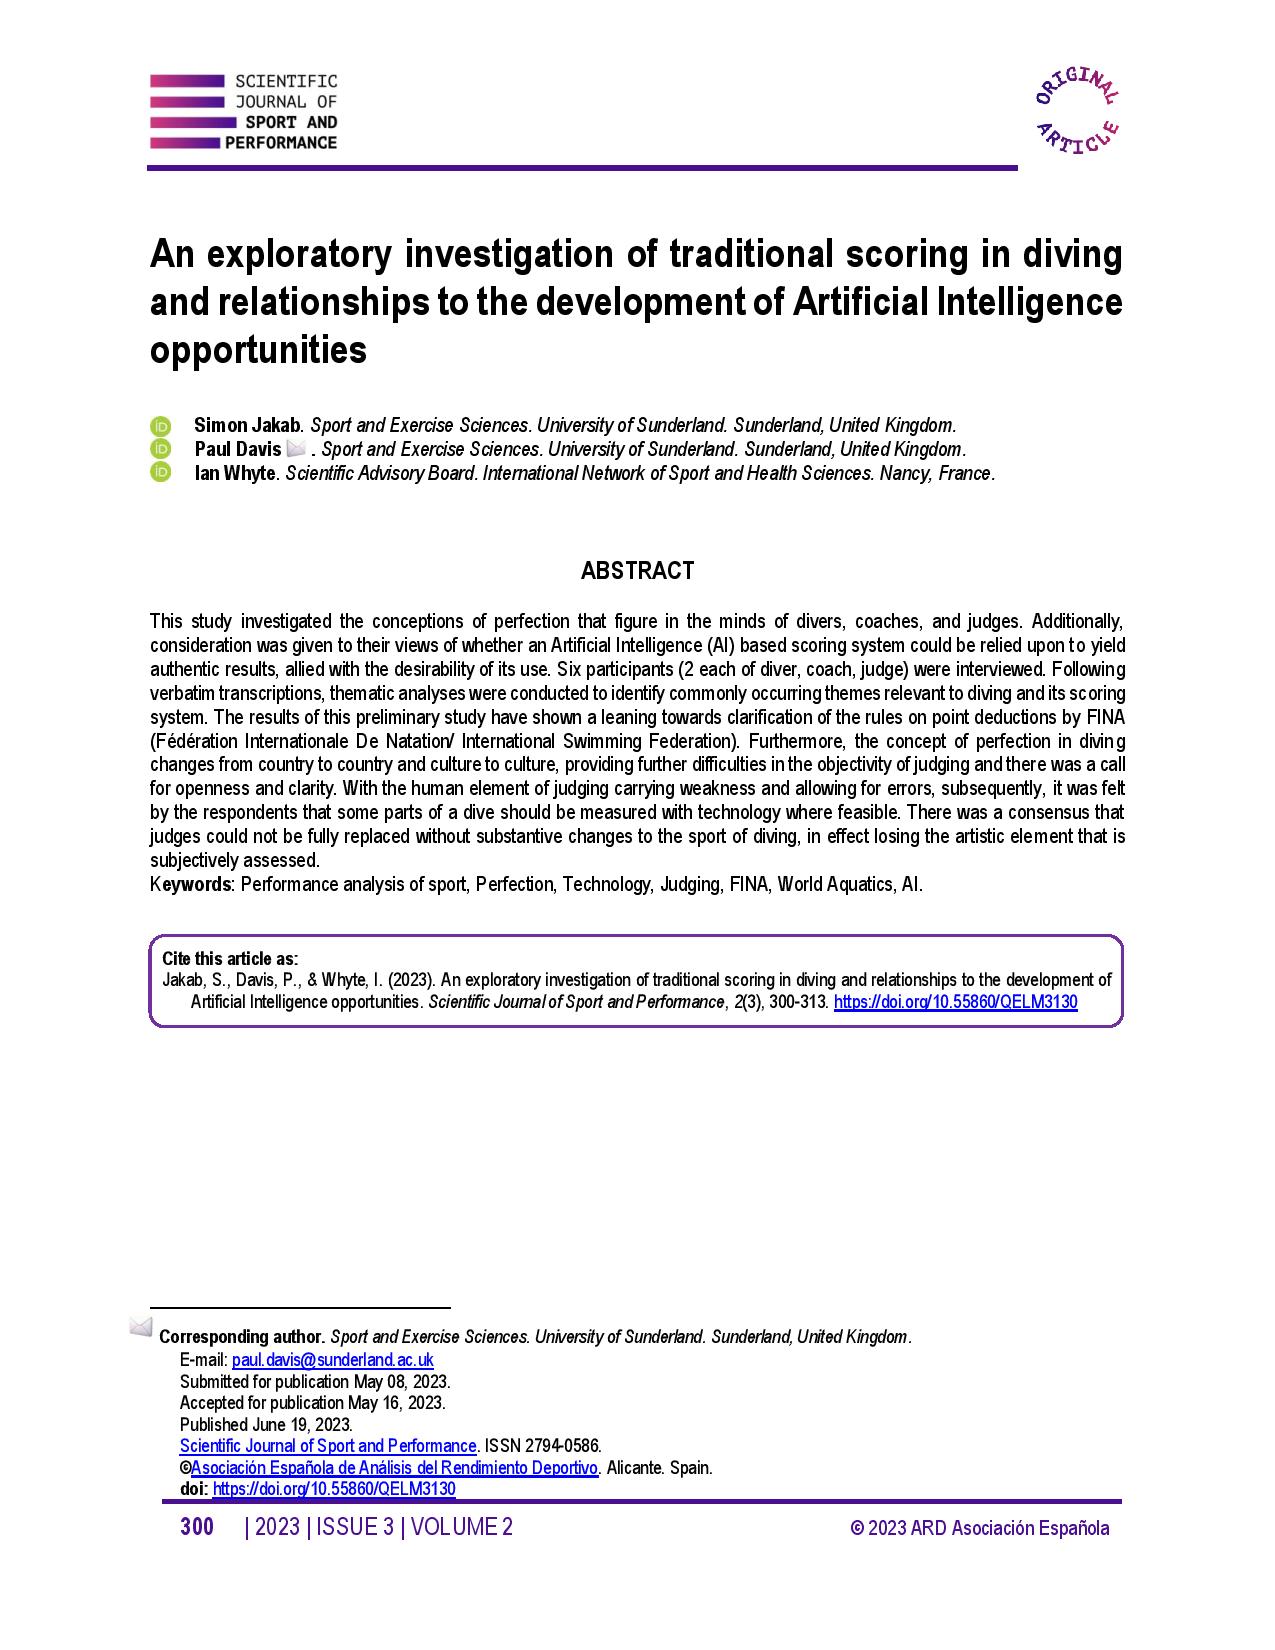 An exploratory investigation of traditional scoring in diving and relationships to the development of Artificial Intelligence opportunities